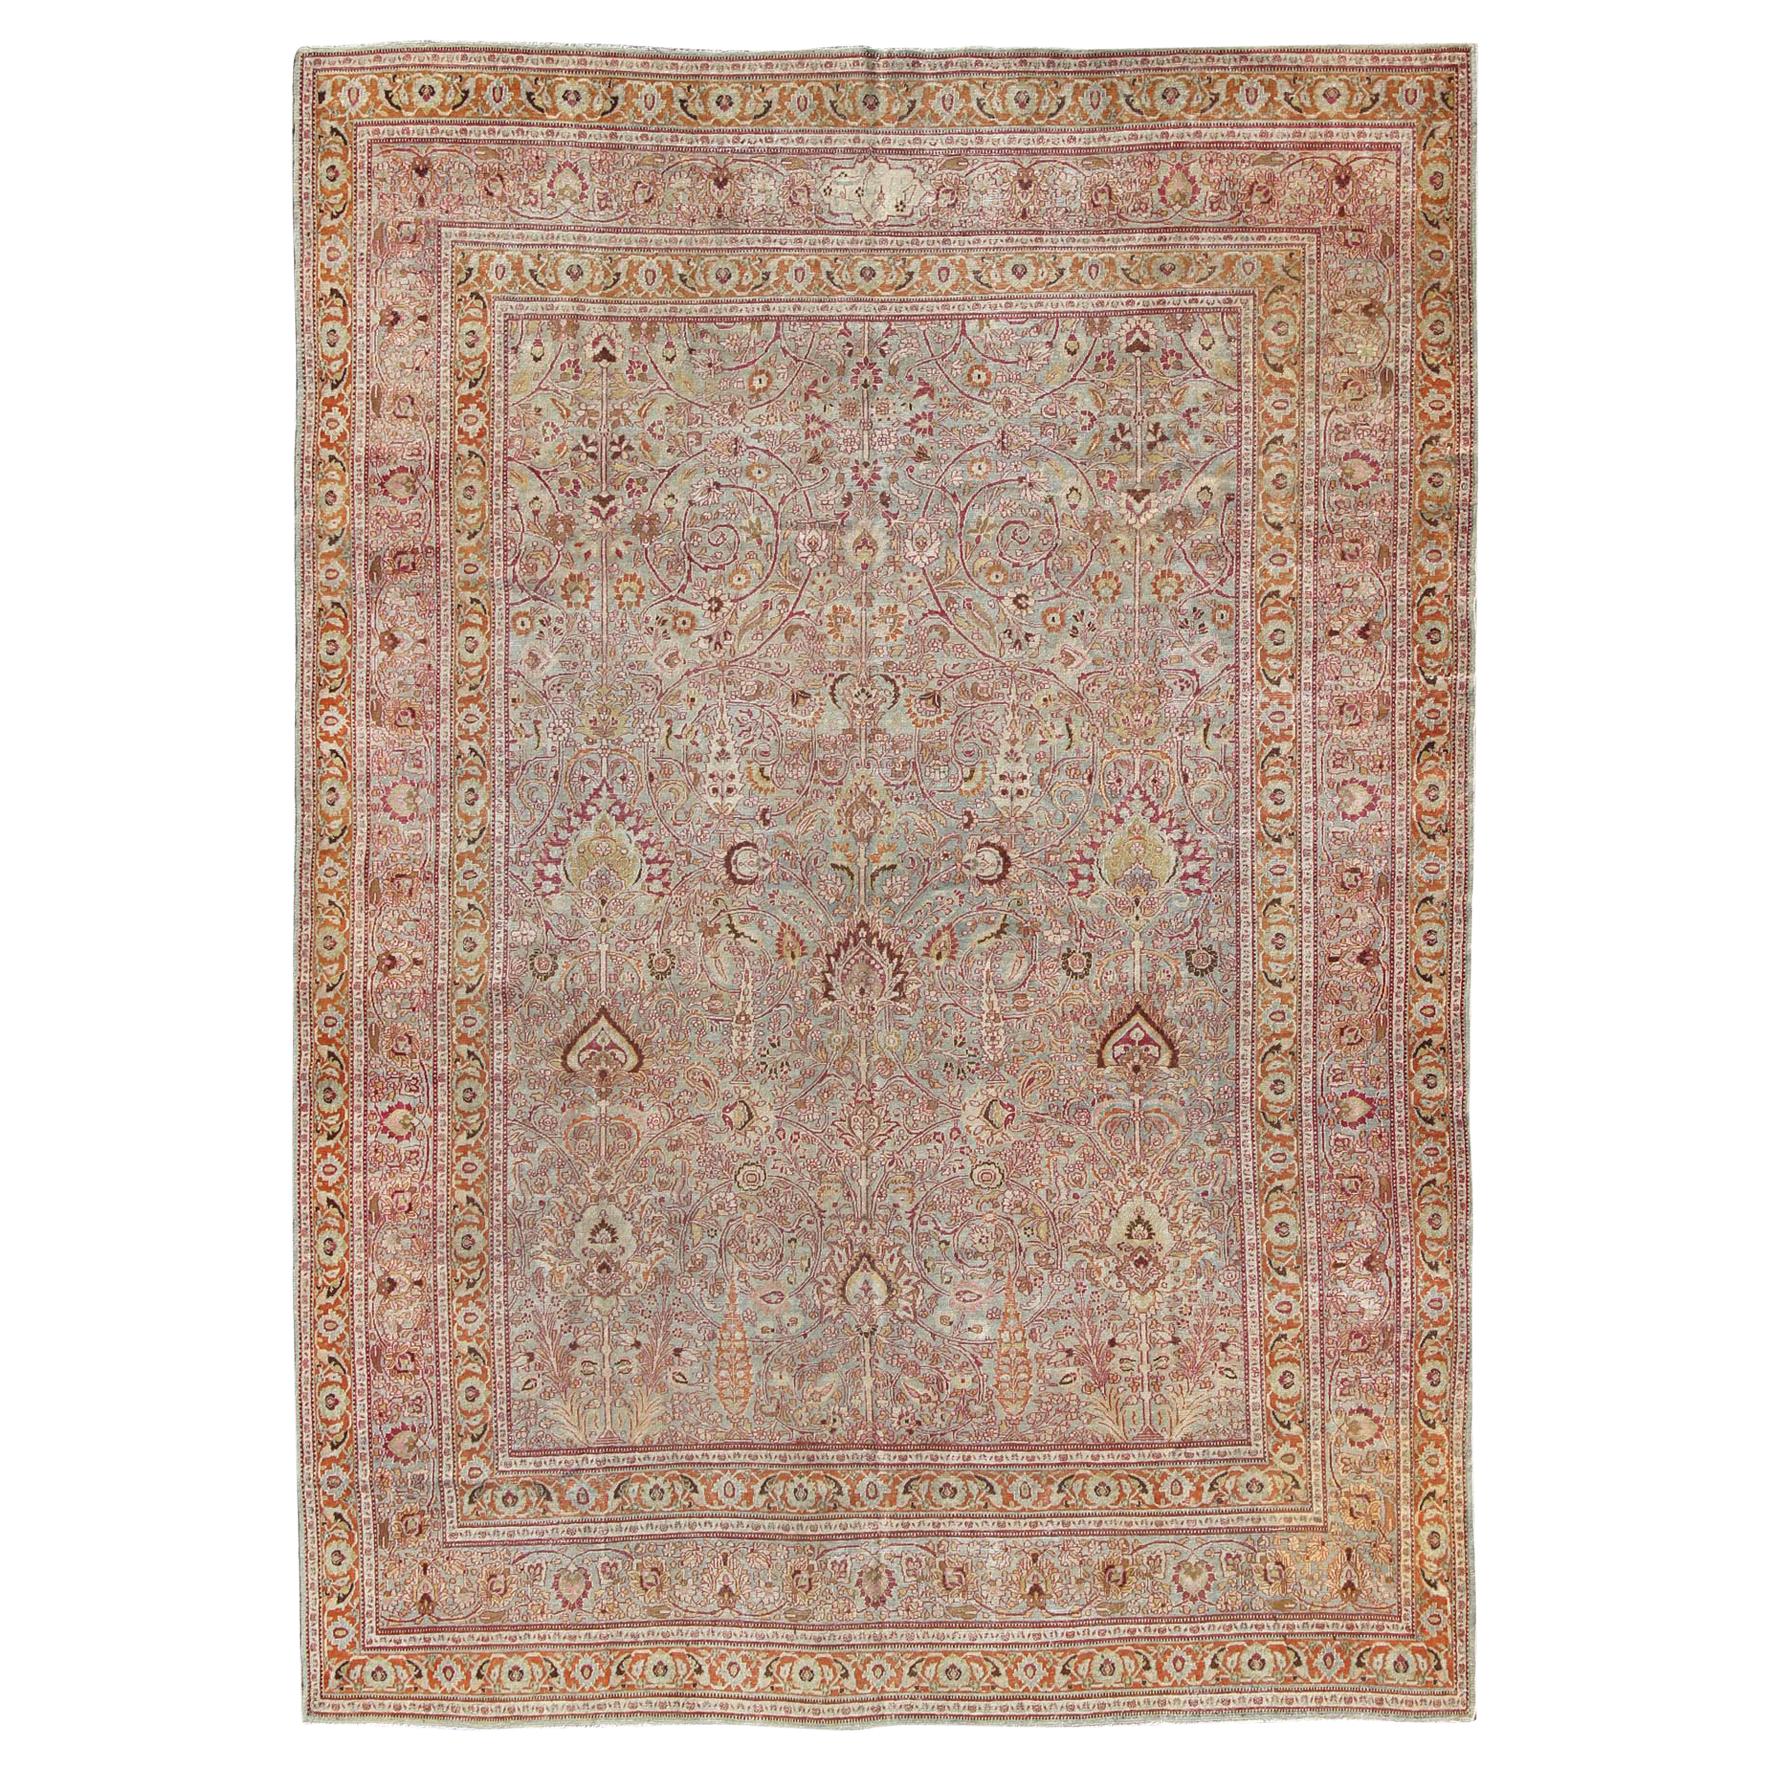 Antique Persian Khorassan Rug with All-Over Floral Design in Orange, Red, Pink For Sale